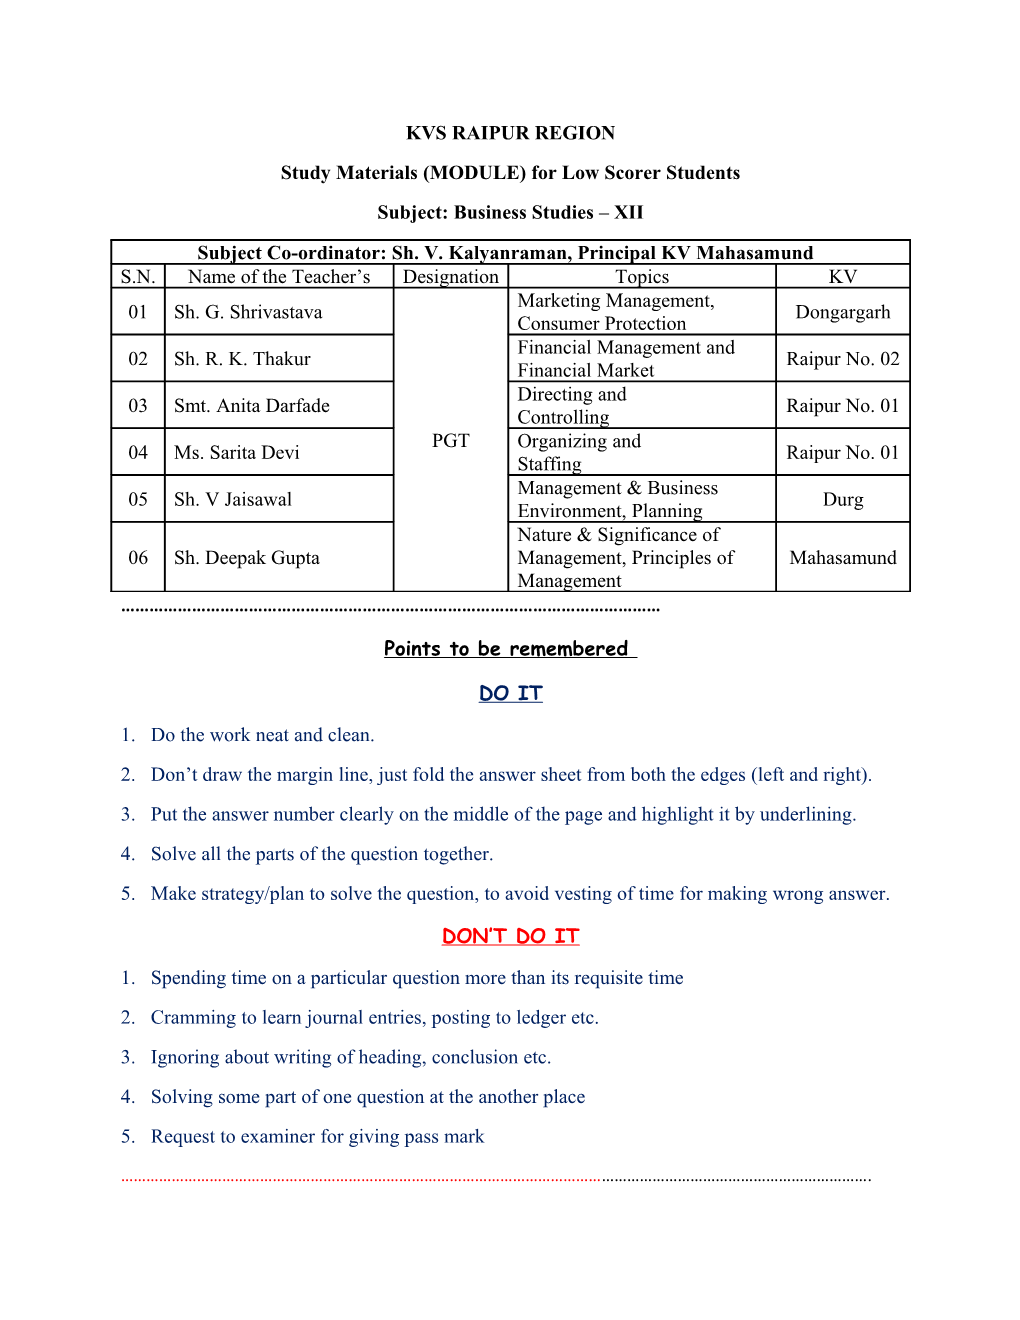 Study Materials (MODULE) for Low Scorer Students